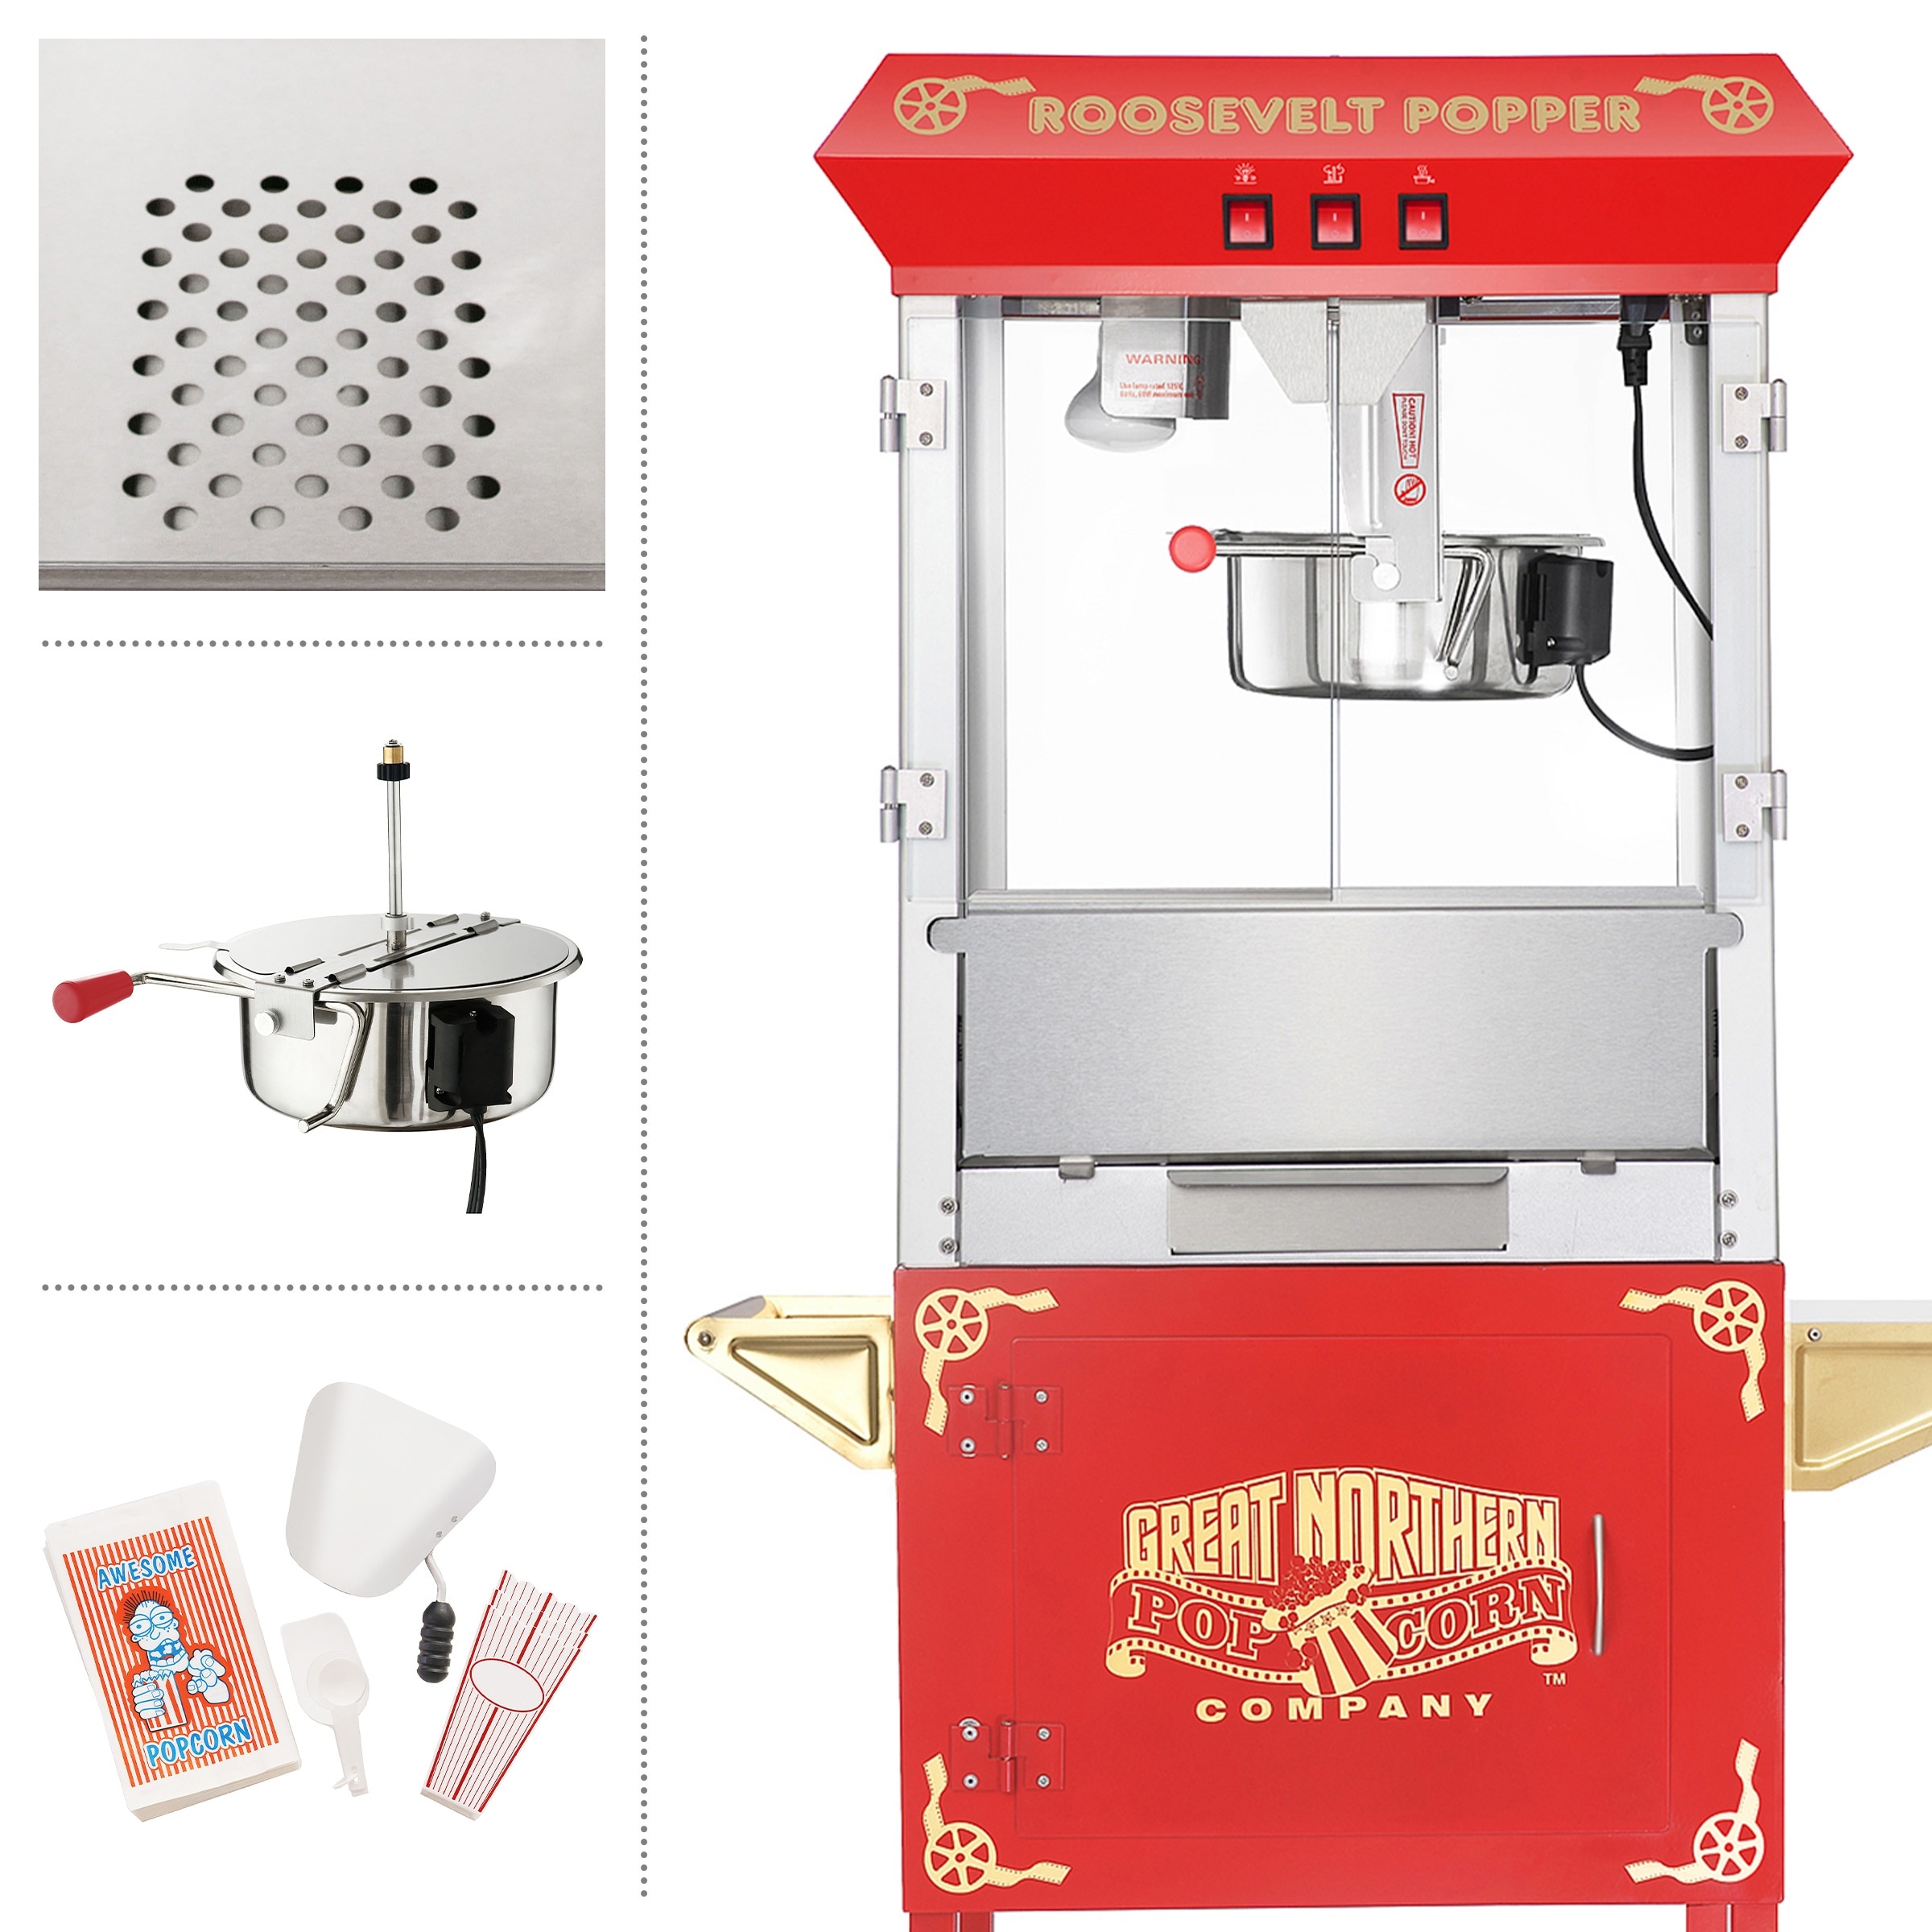 https://ak1.ostkcdn.com/images/products/is/images/direct/6d9ce3738c3a664df46843a4072e49f7de7e2ee6/Popcorn-Machine-with-Cart-%E2%80%93-8oz-Popper-with-Stainless-steel-Kettle-by-Great-Northern-Popcorn-%28Red%29.jpg